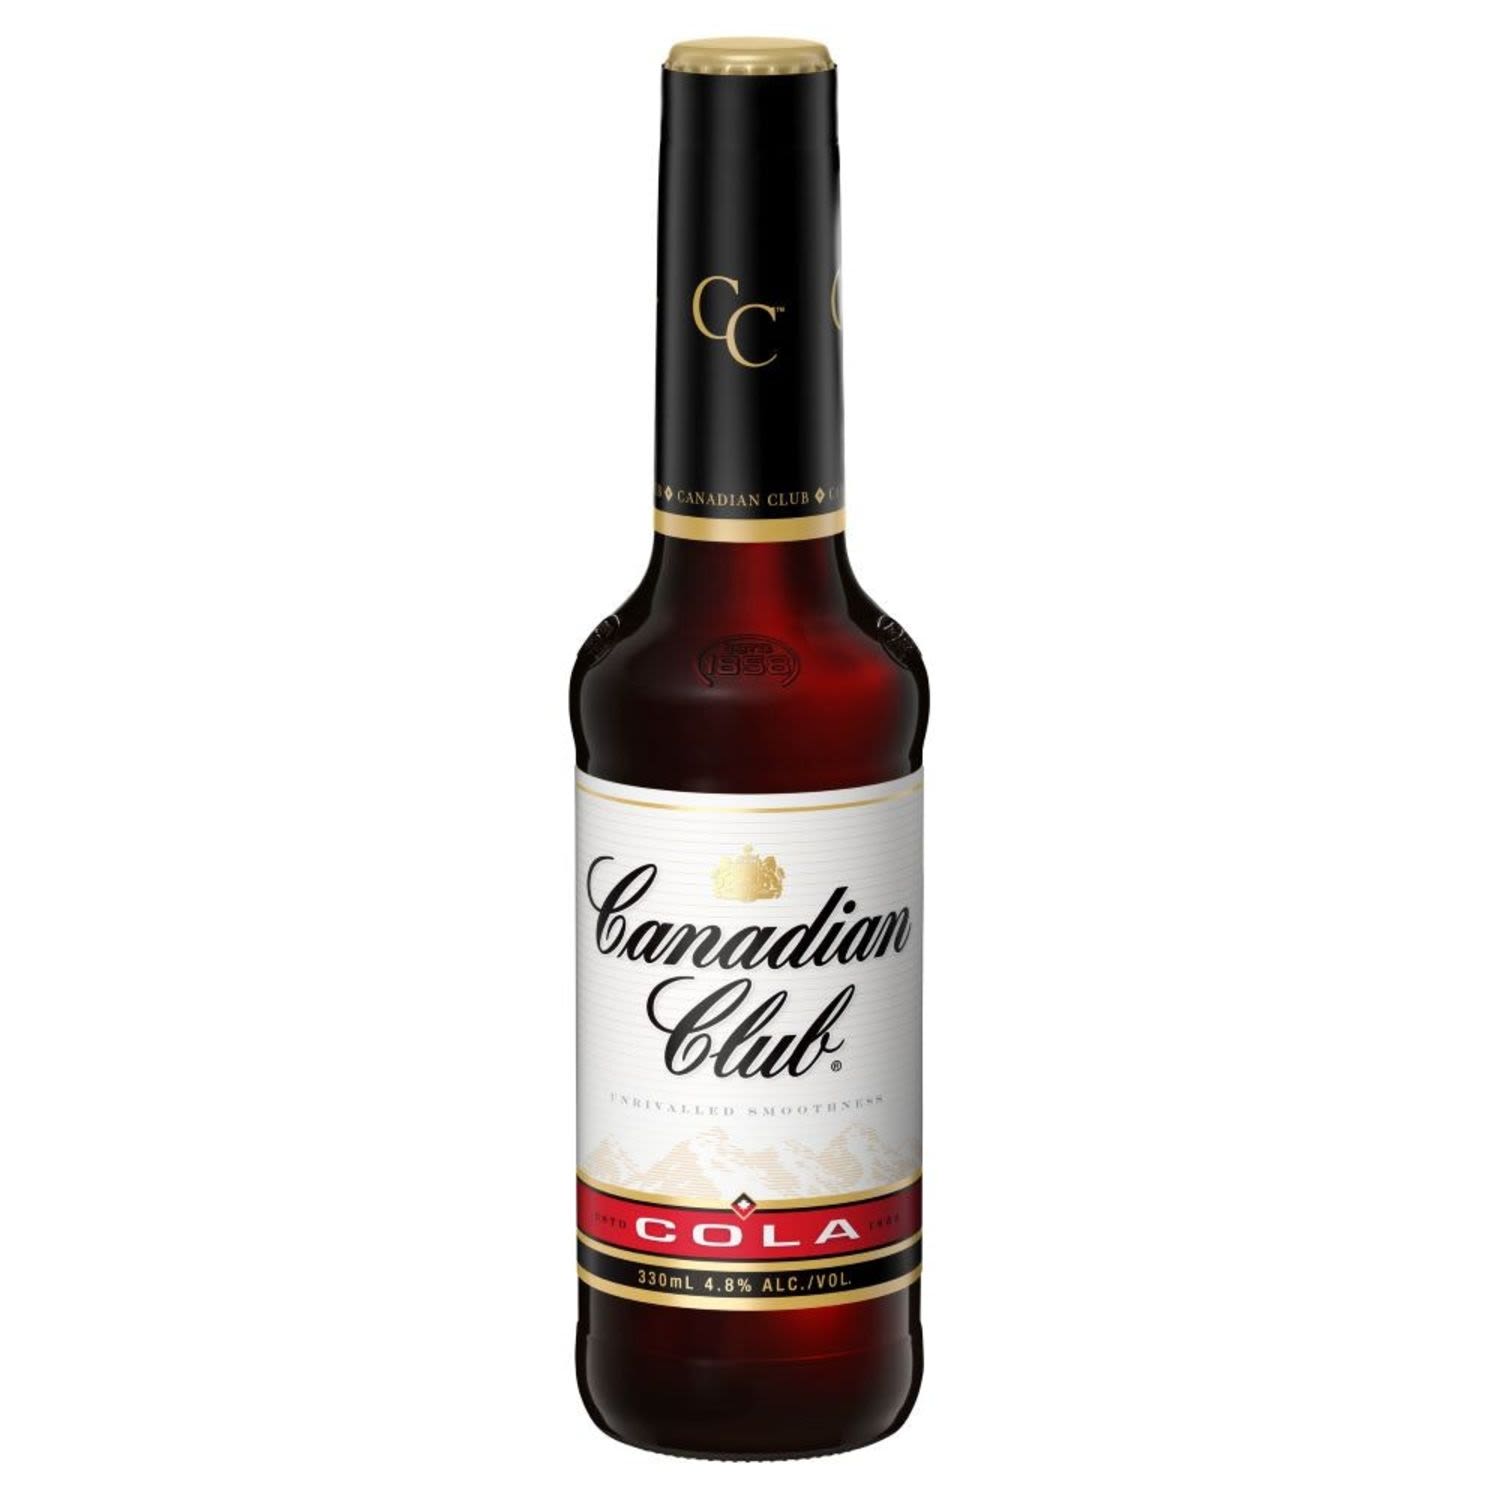 Canadian Club Whisky RTD comes as a blend of six-year-old Canadian Club and Cola. Enjoy chilled or poured over ice for the ultimate refreshment.<br /> <br />Alcohol Volume: 4.80%<br /><br />Pack Format: Bottle<br /><br />Standard Drinks: 1.3</br /><br />Pack Type: Bottle<br />